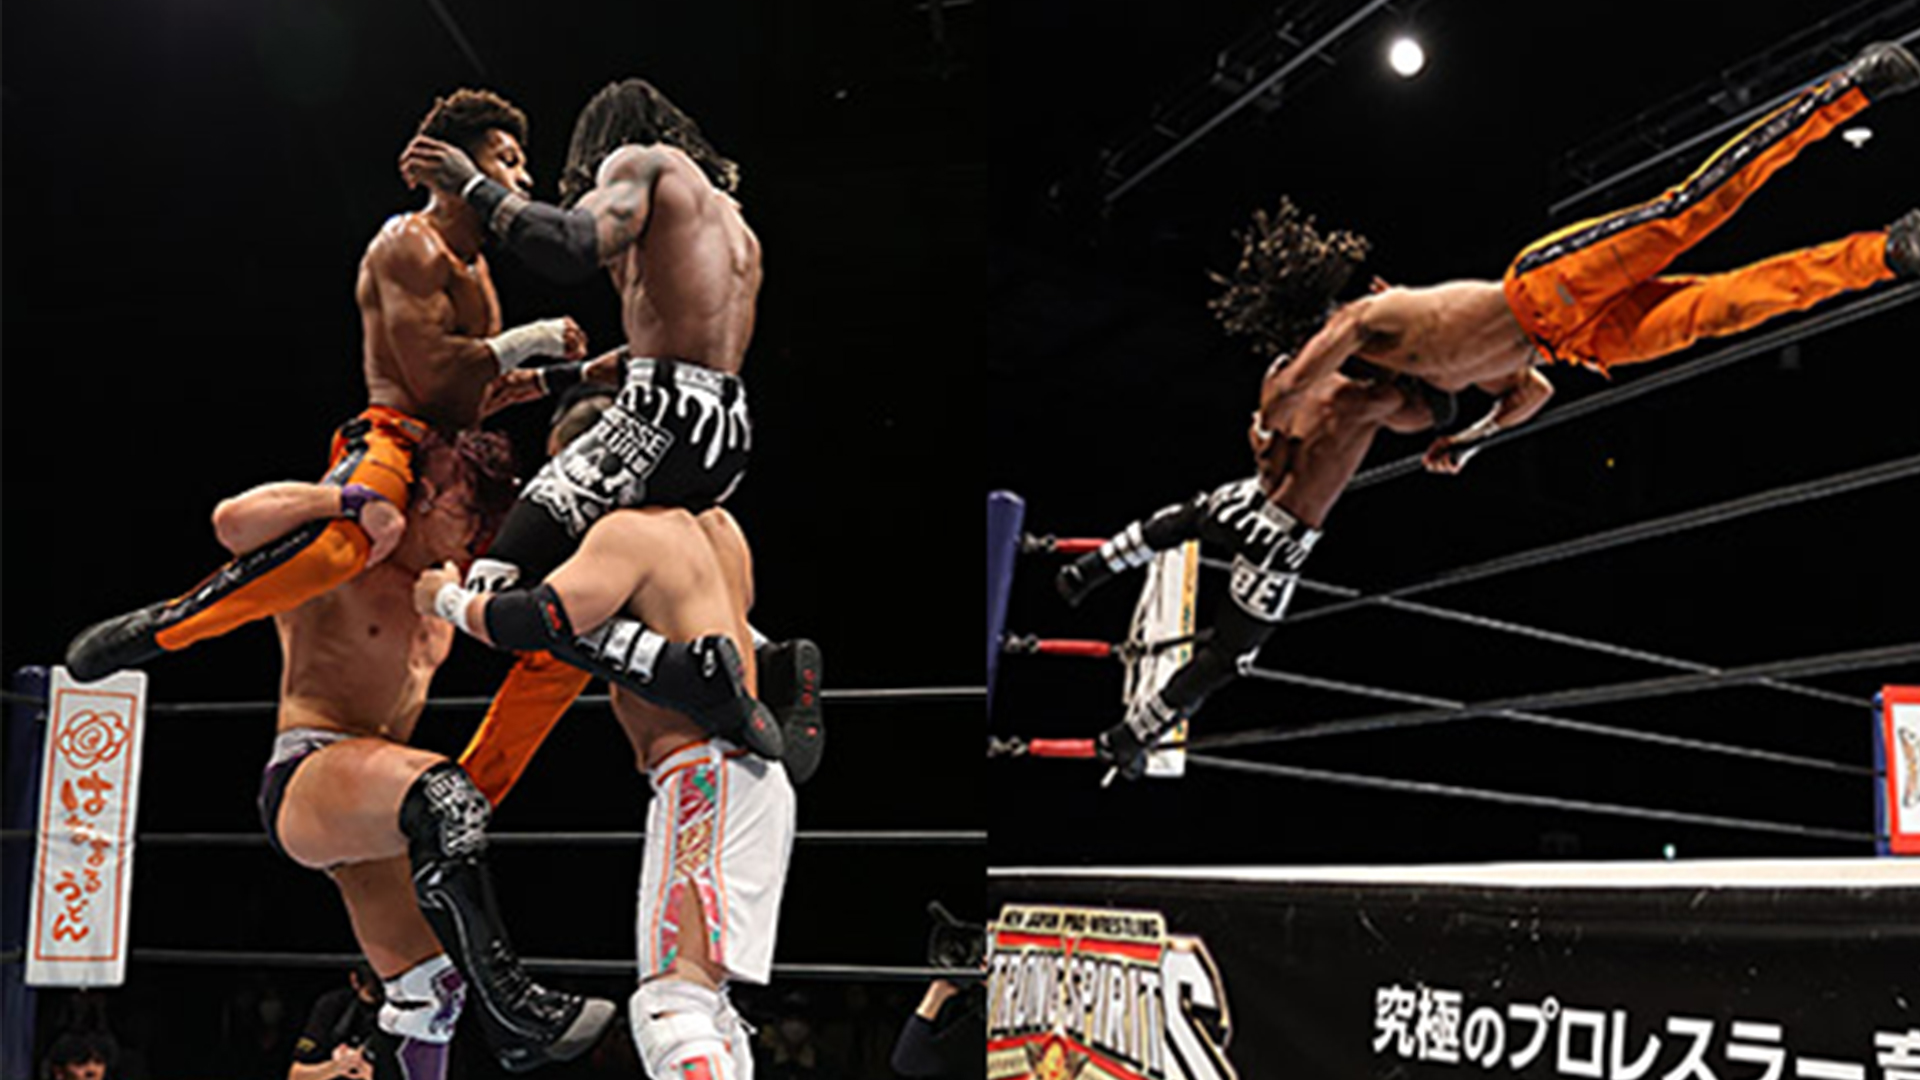 Ace Austin & Chris Bey Take the Lead in the NJPW Super Jr Tag League – IMPACT Wrestling